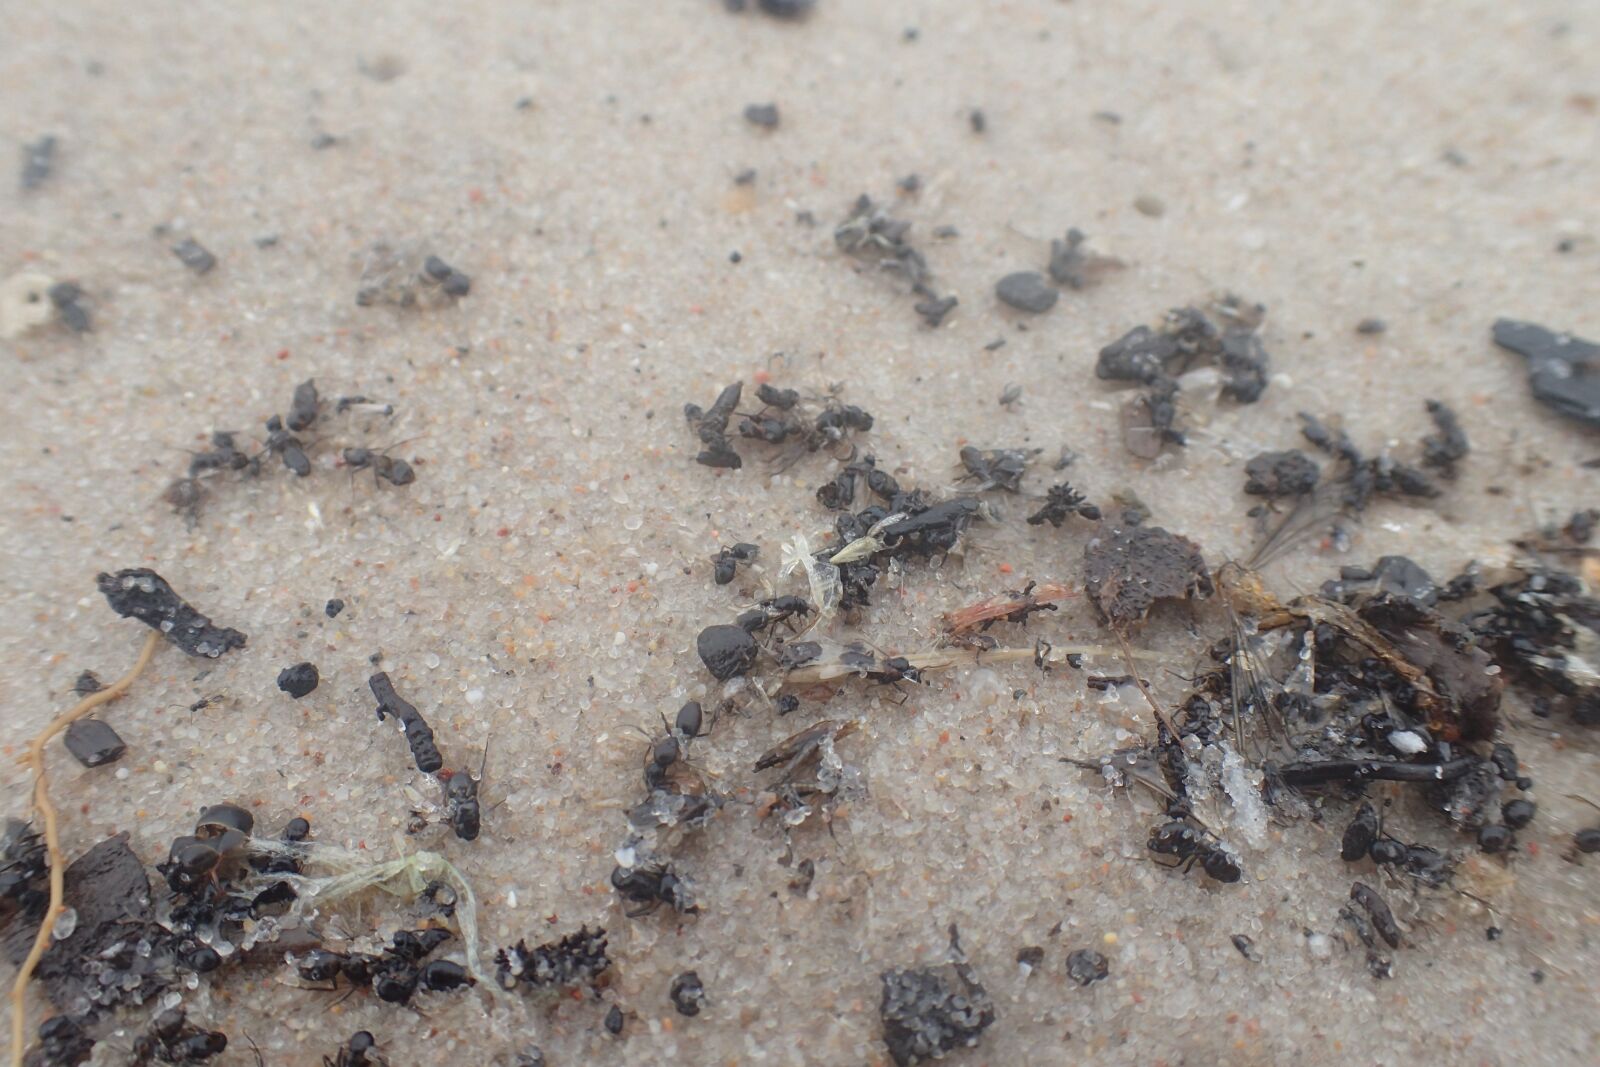 Olympus TG-3 sample photo. Ants, ant, dead photography